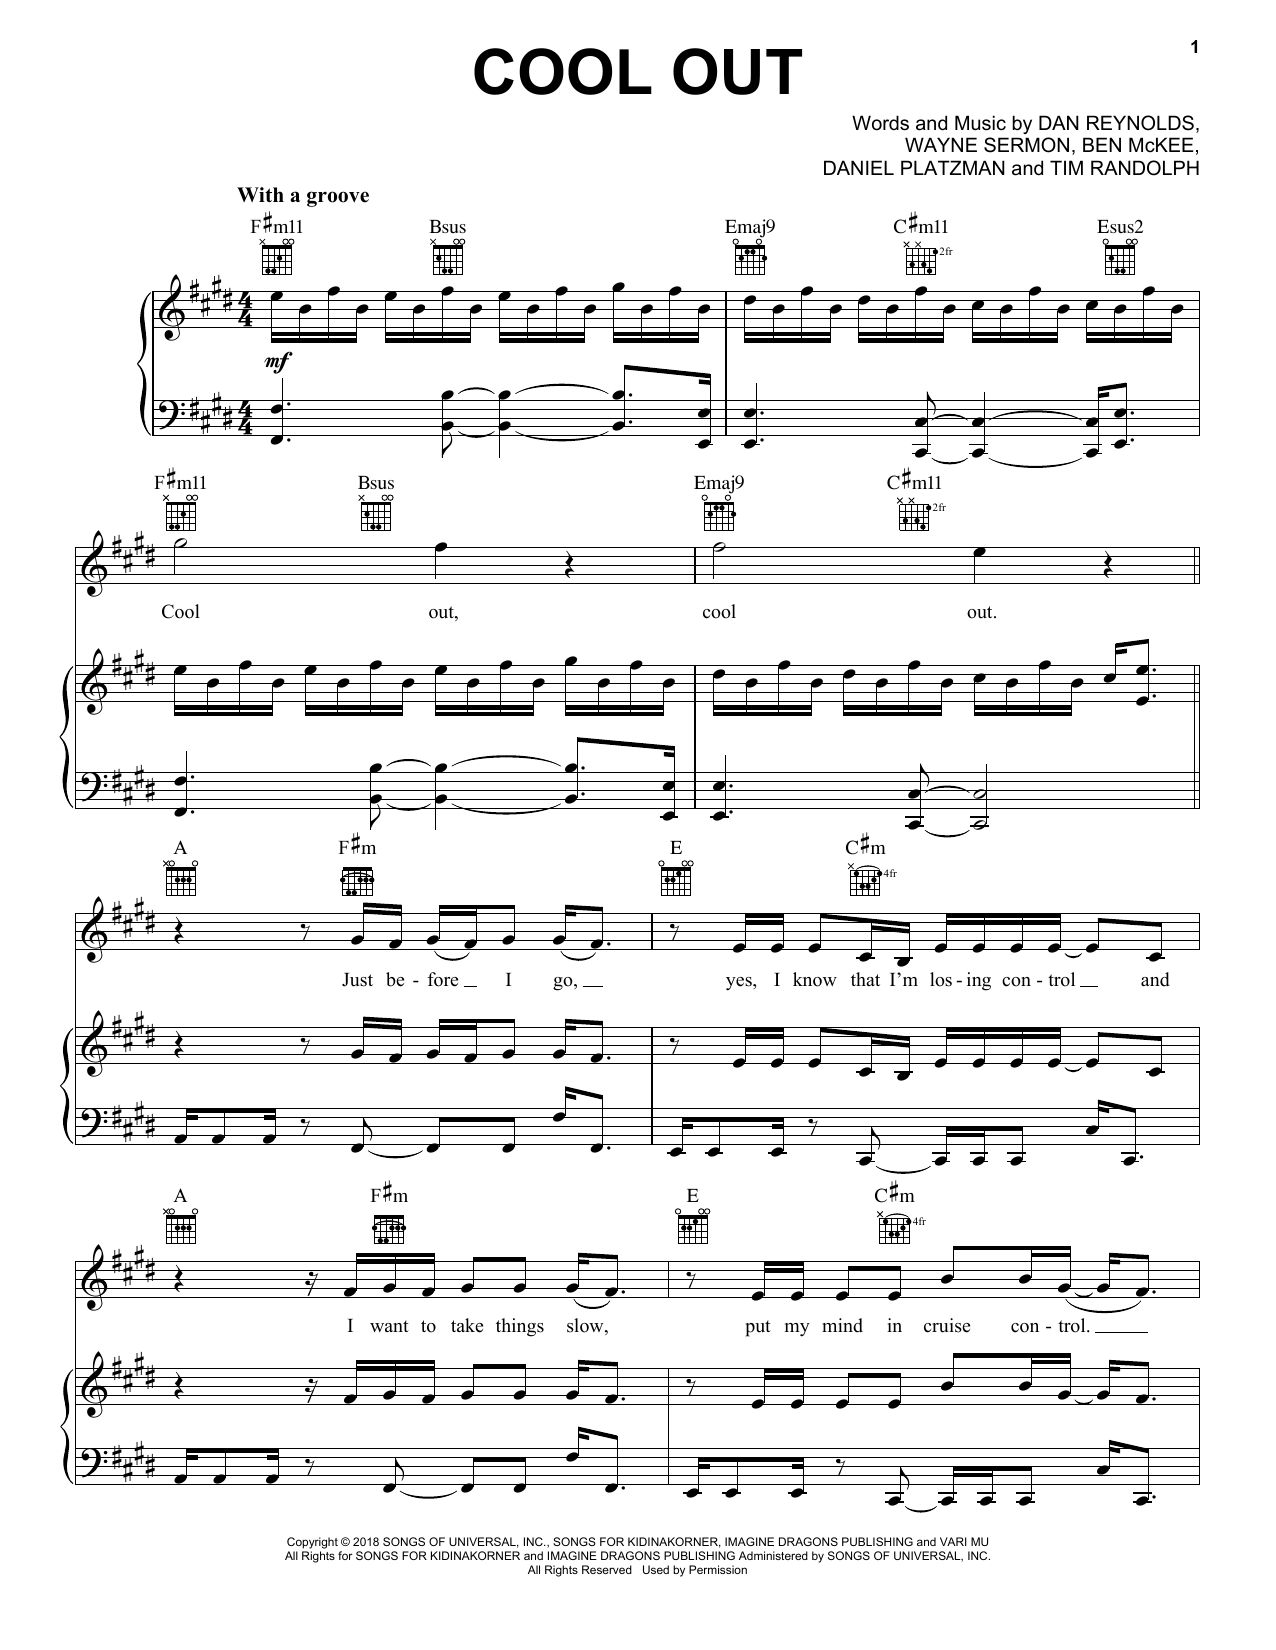 Download Imagine Dragons Cool Out Sheet Music